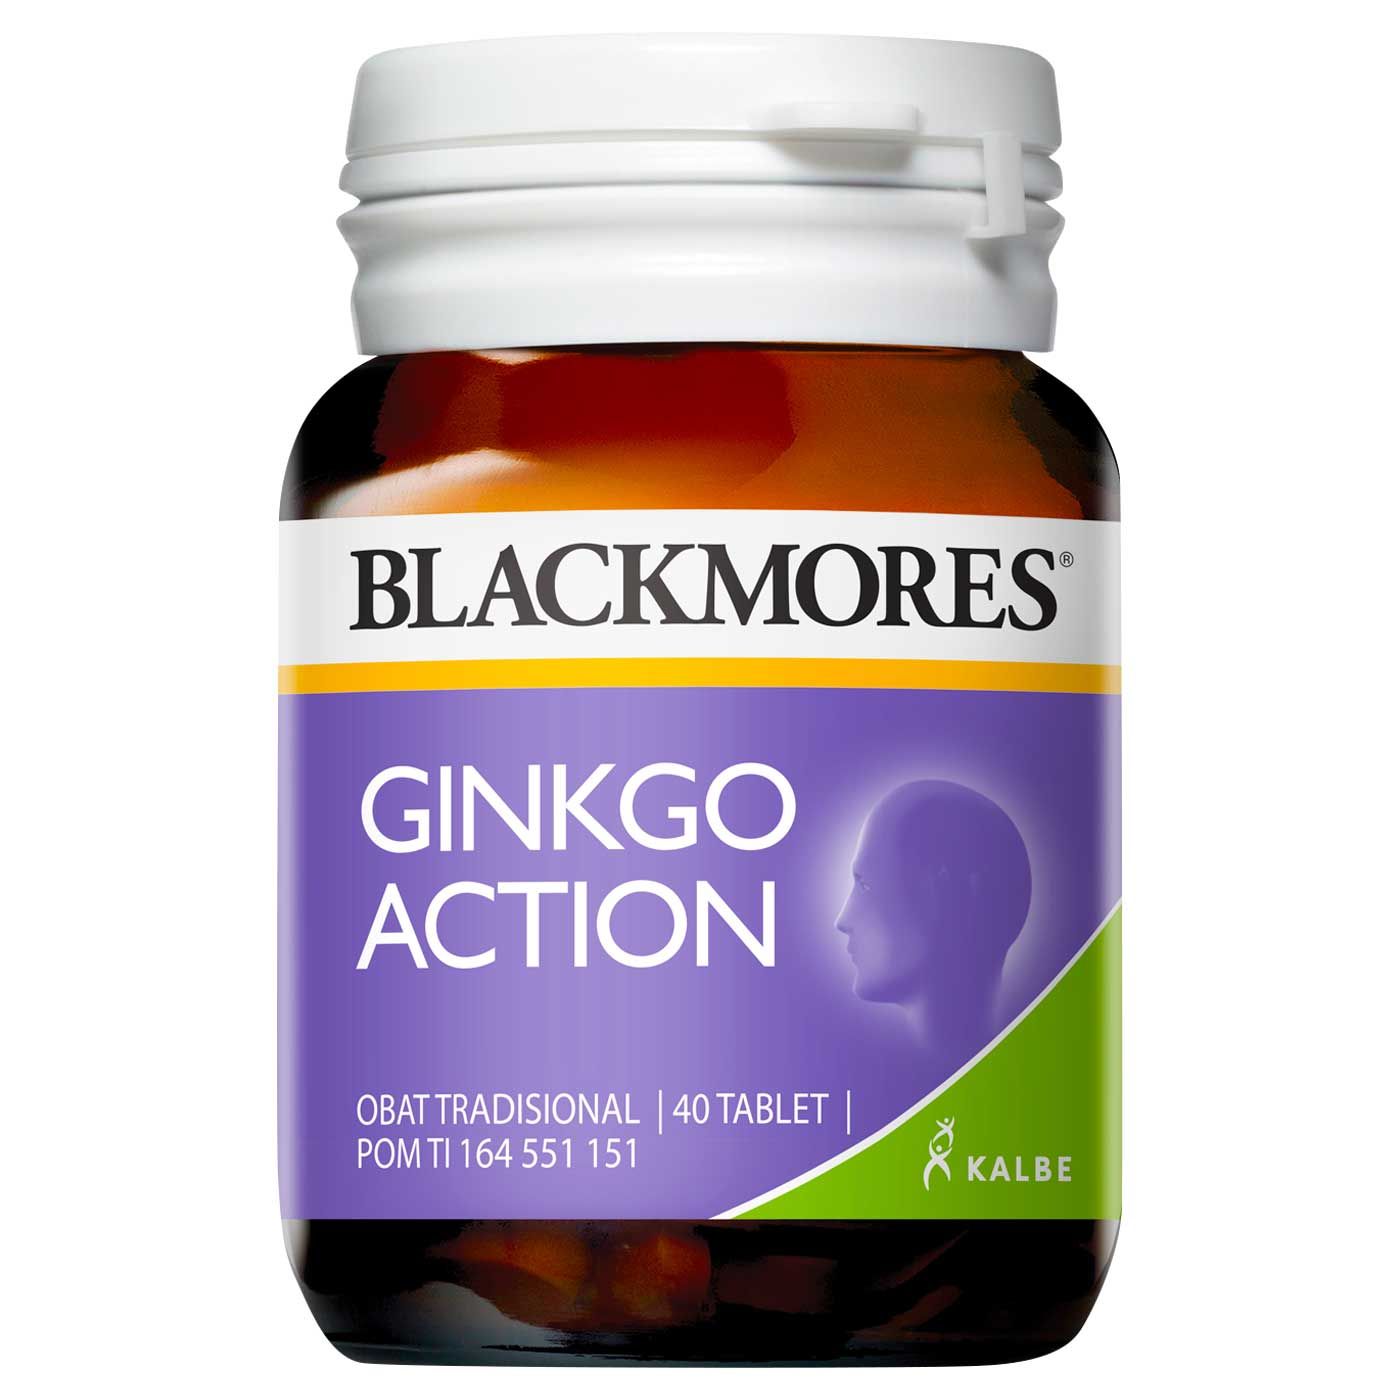 Blackmores Ginkgo Action 40 Tablets - 1